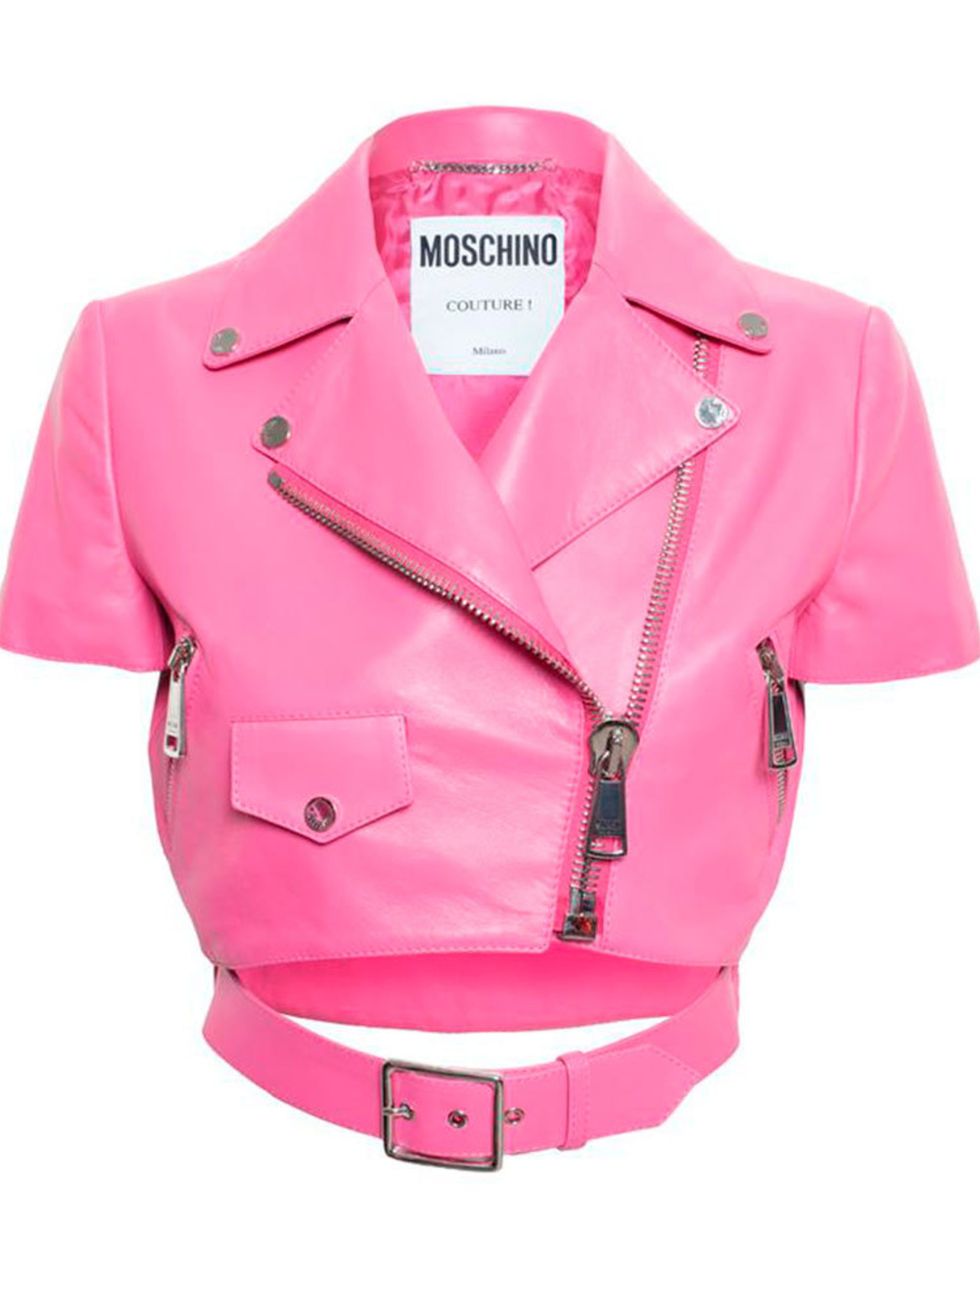 <p>Biker Jacket Moschino £1575, <a href="http://www.brownsfashion.com/product/038612770003/128/cropped-leather-biker-jacket">Browns</a> </p>